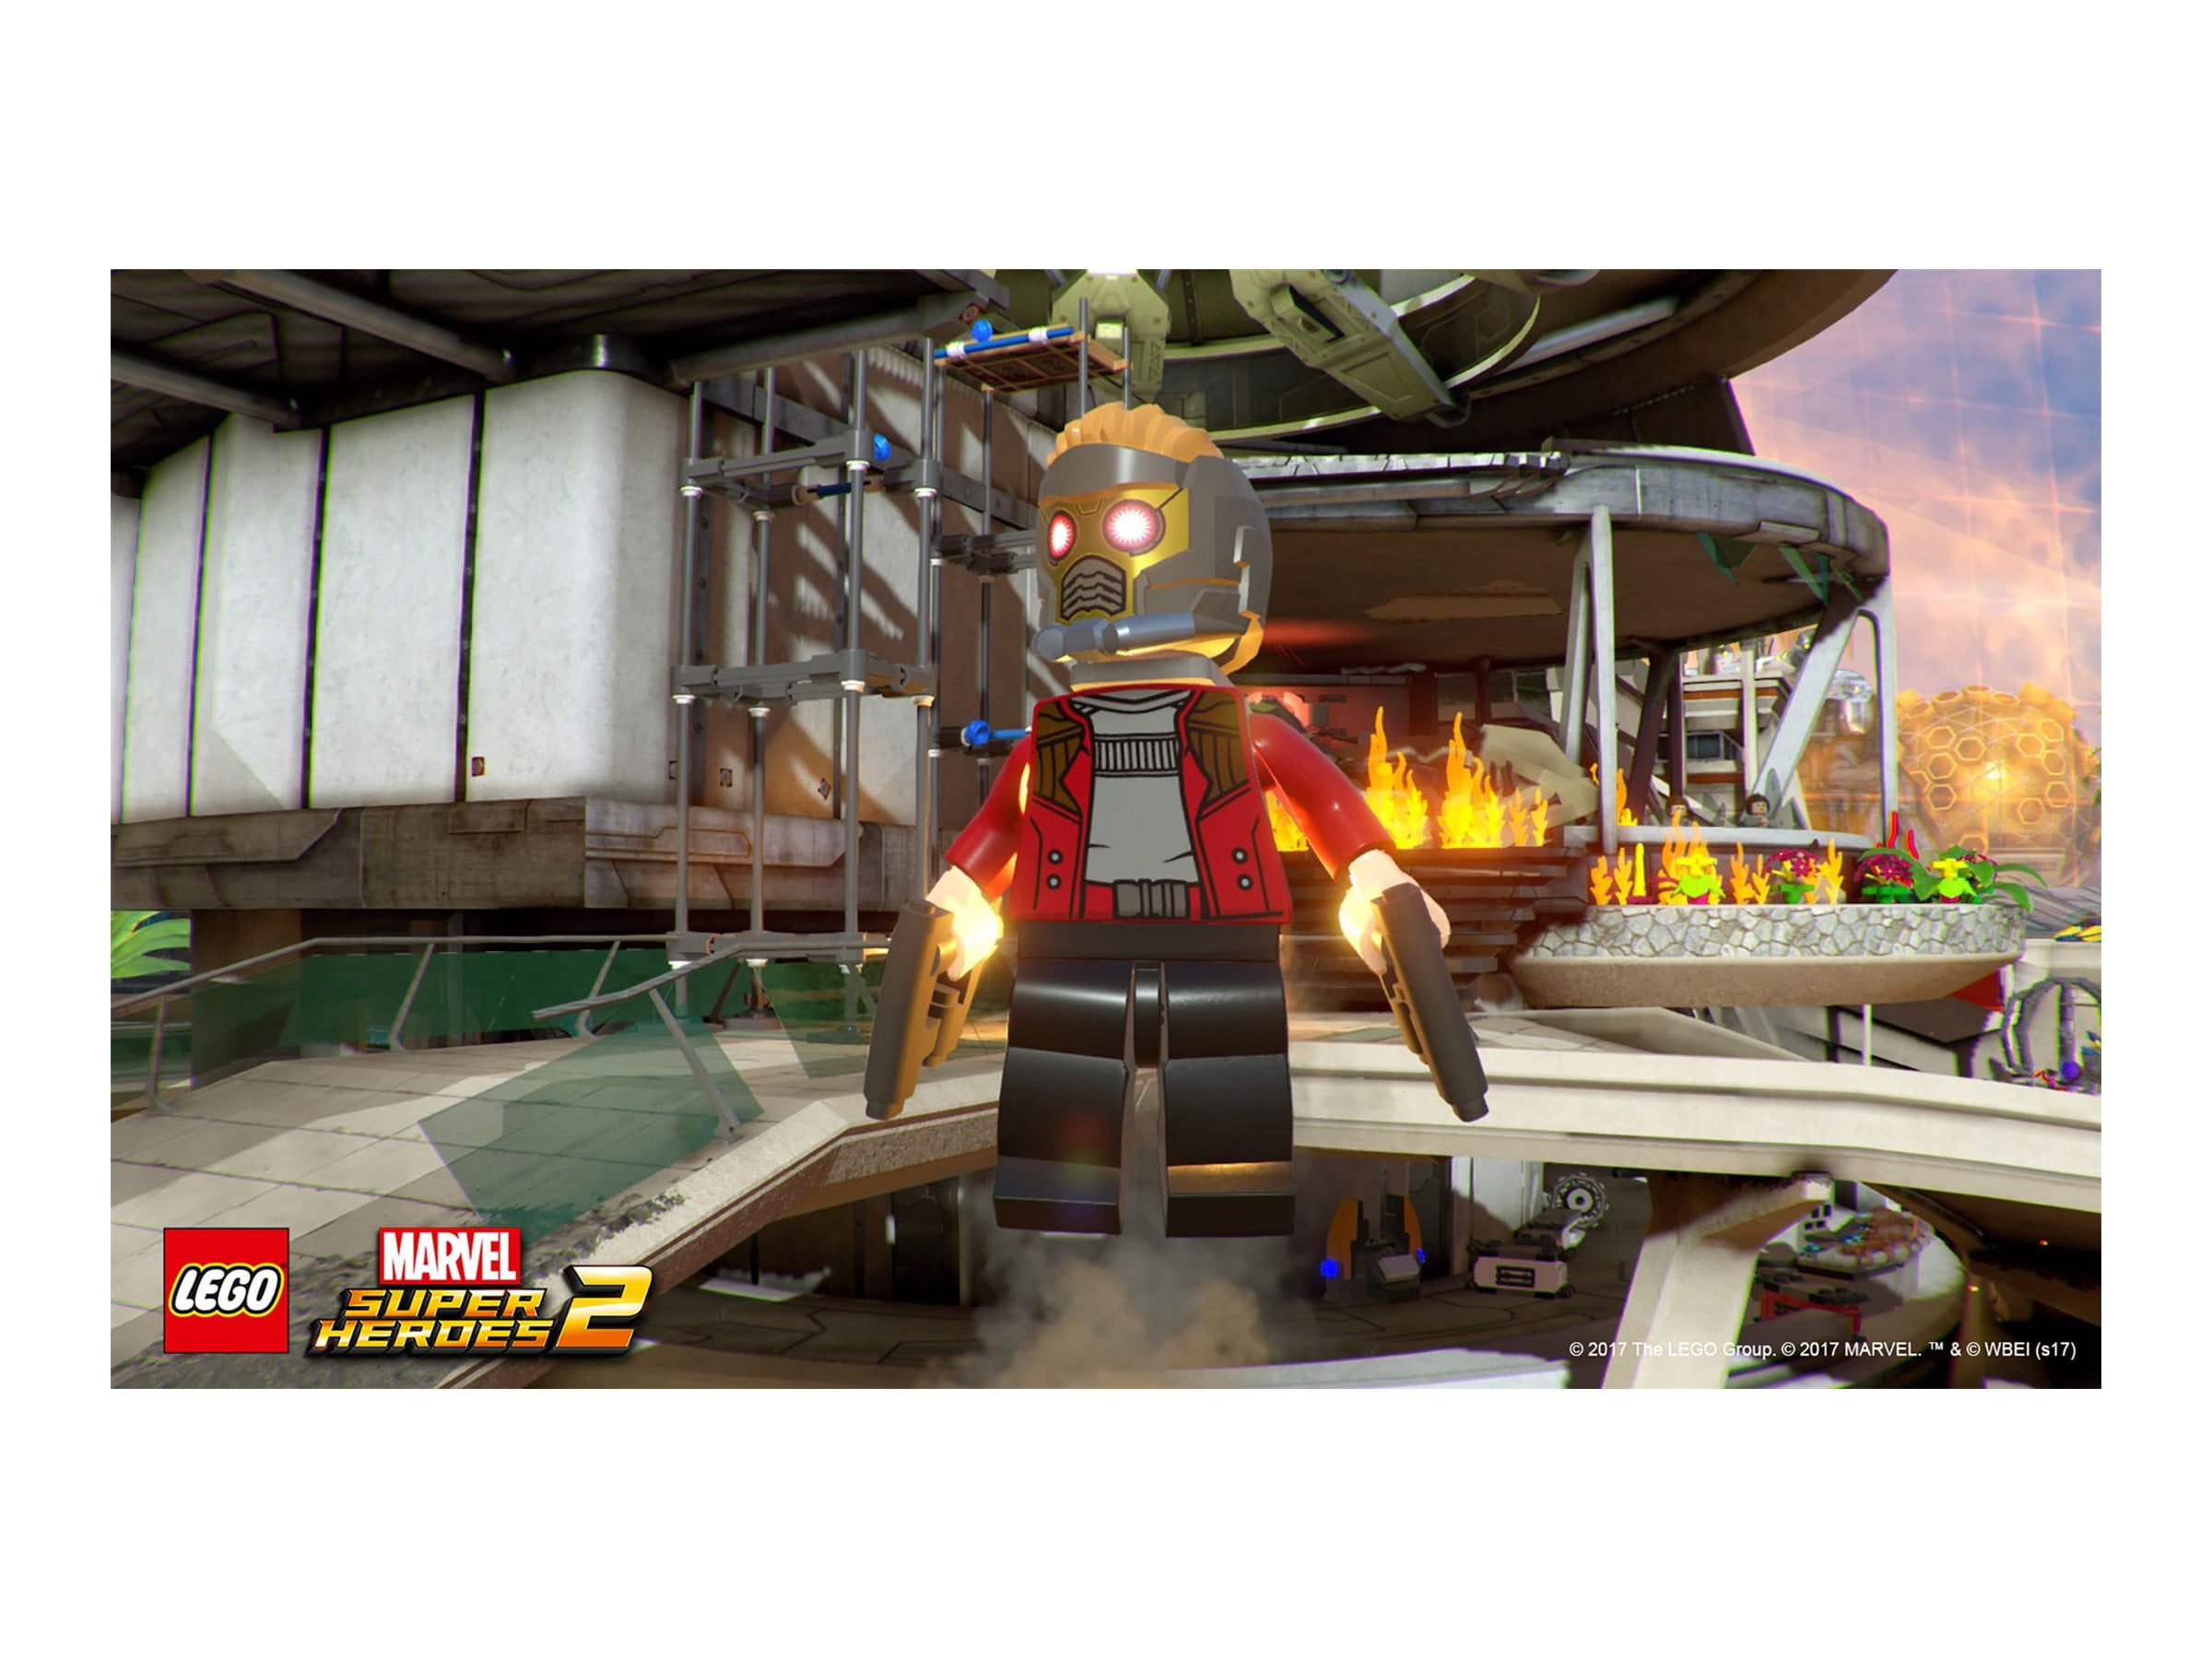  Lego Marvel Collection - Xbox One : Whv Games: Video Games